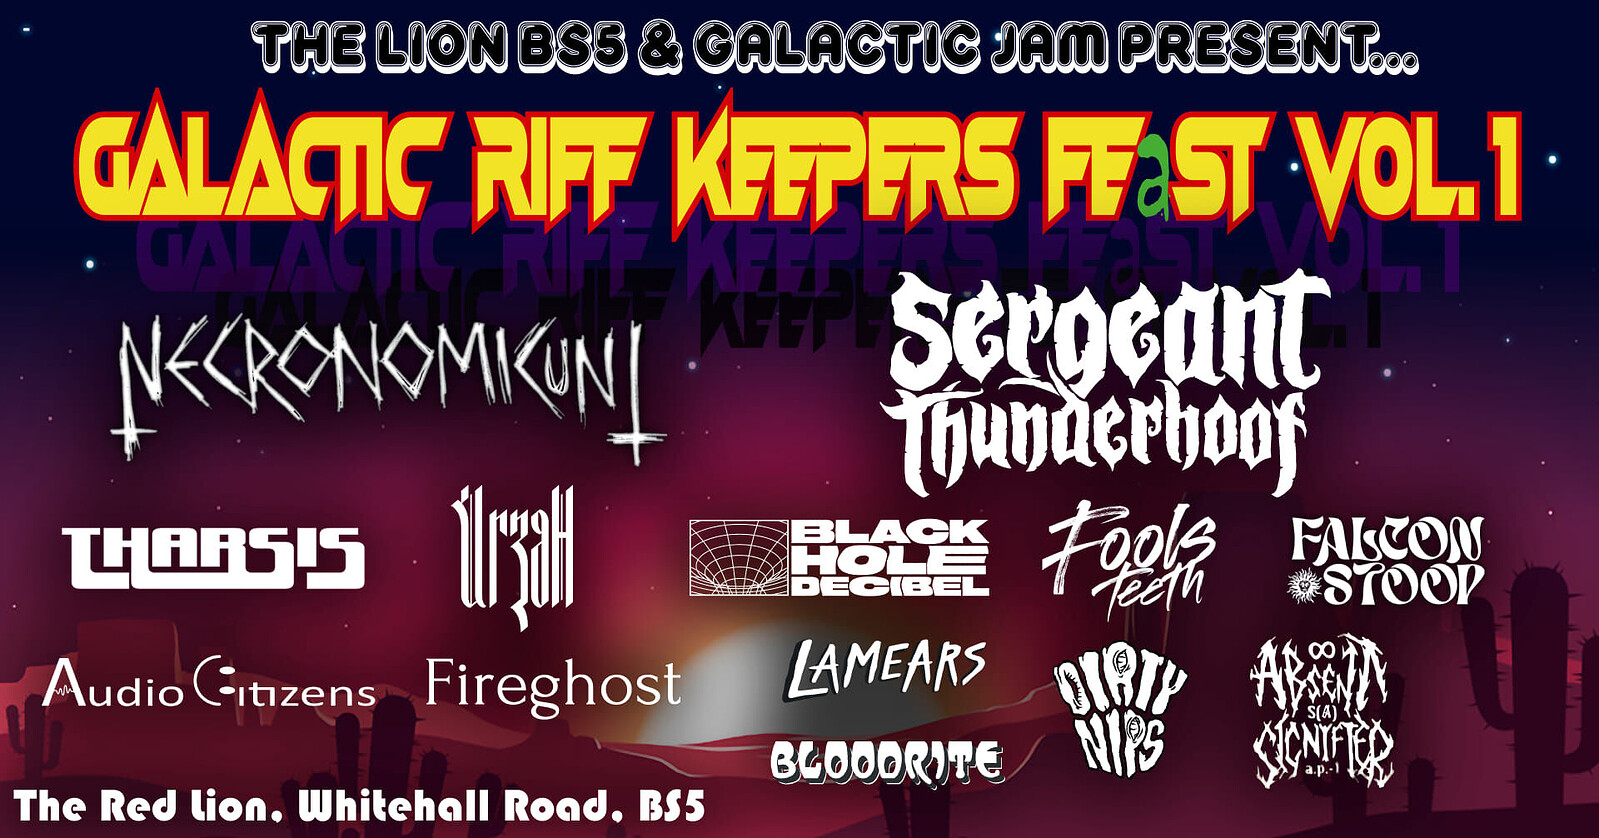 Galactic Riff Keepers Fest Vol.1 - DAY 2 at The Lion BS5